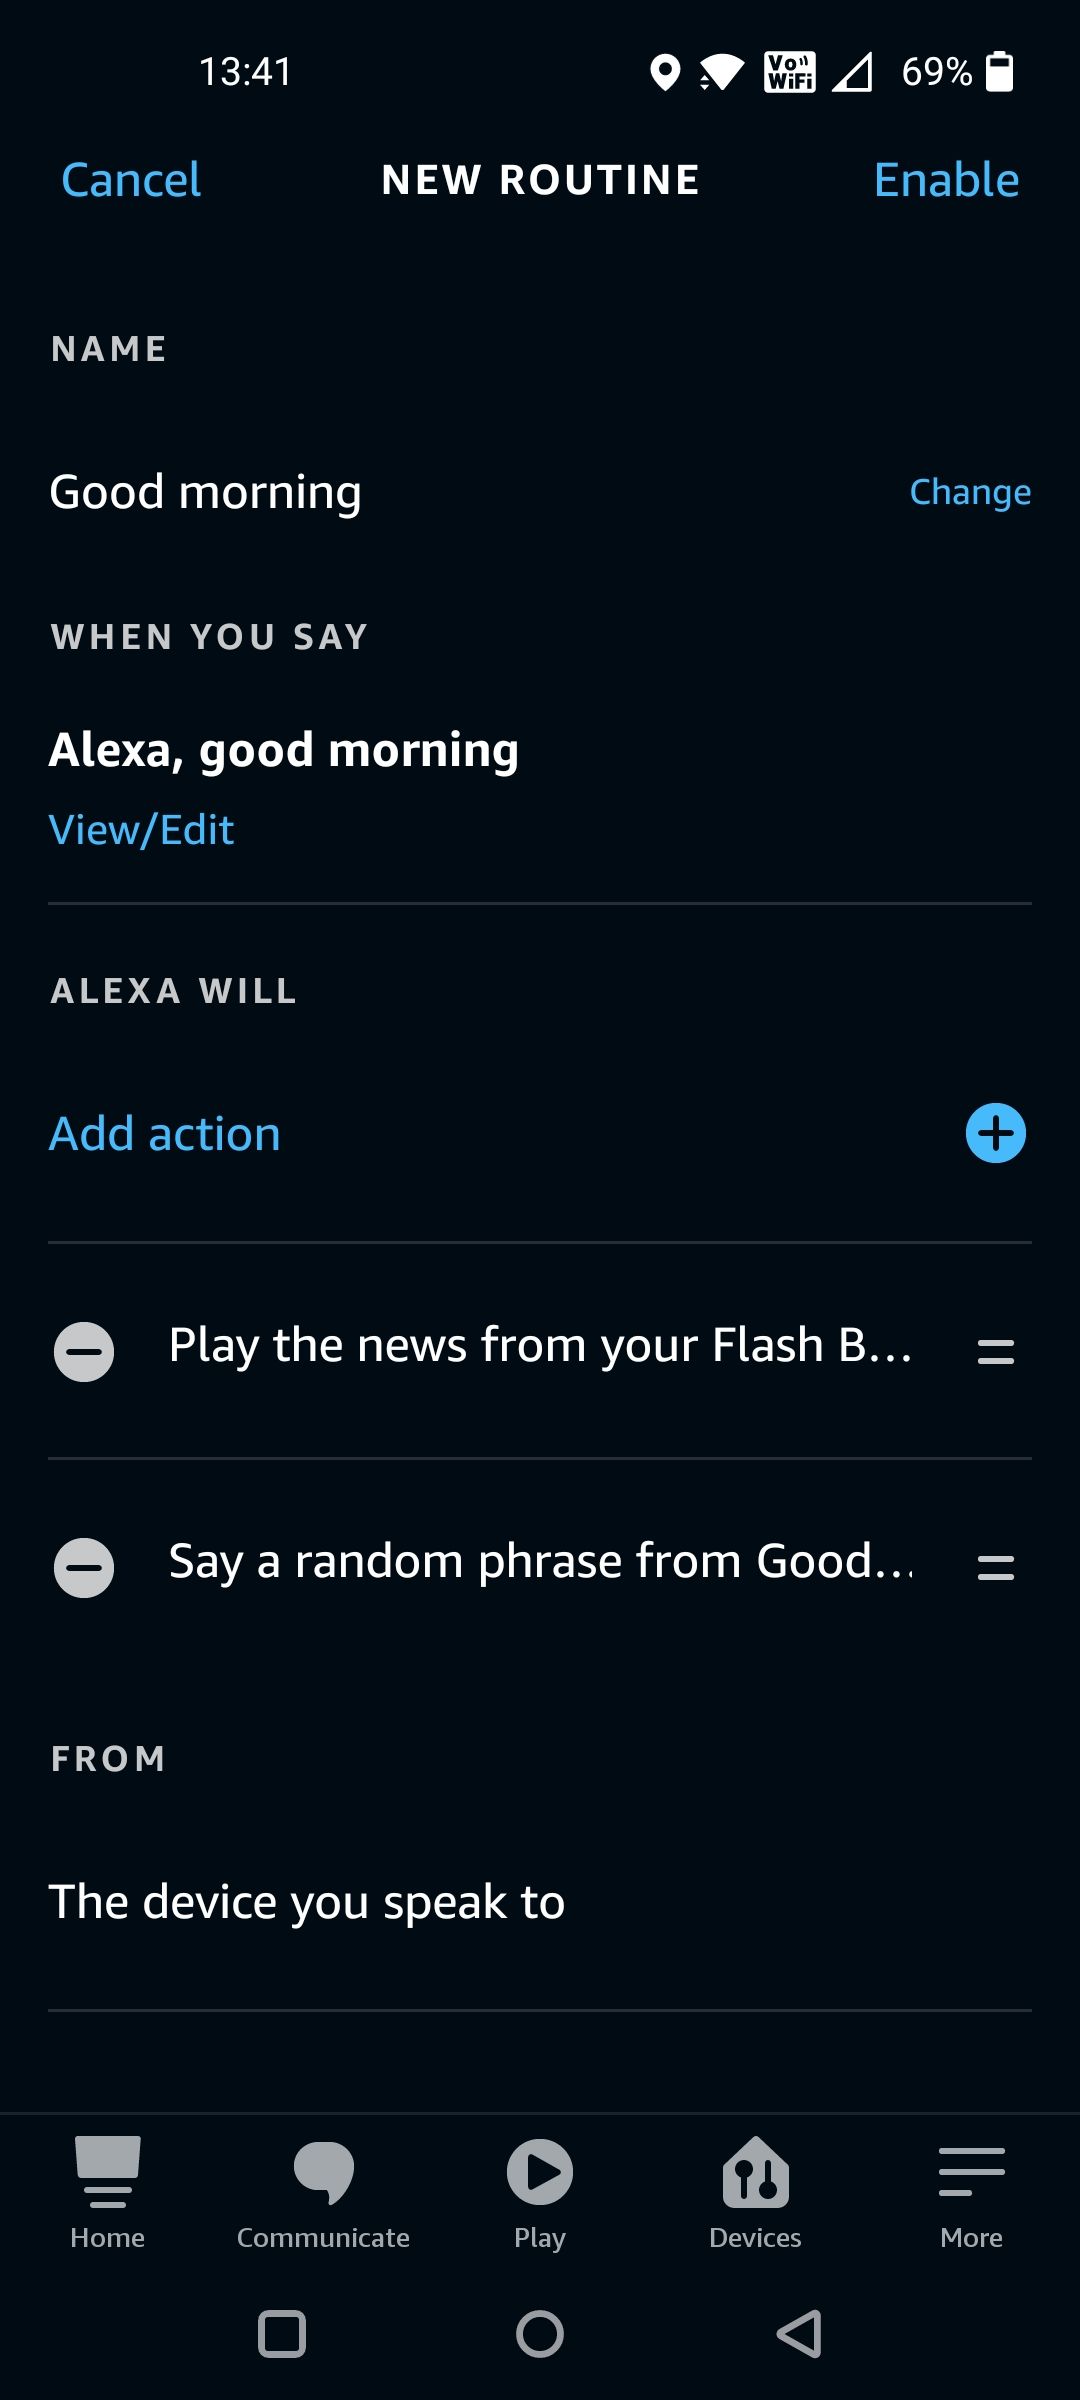 Good Morning Routine in Alexa Featured Routines